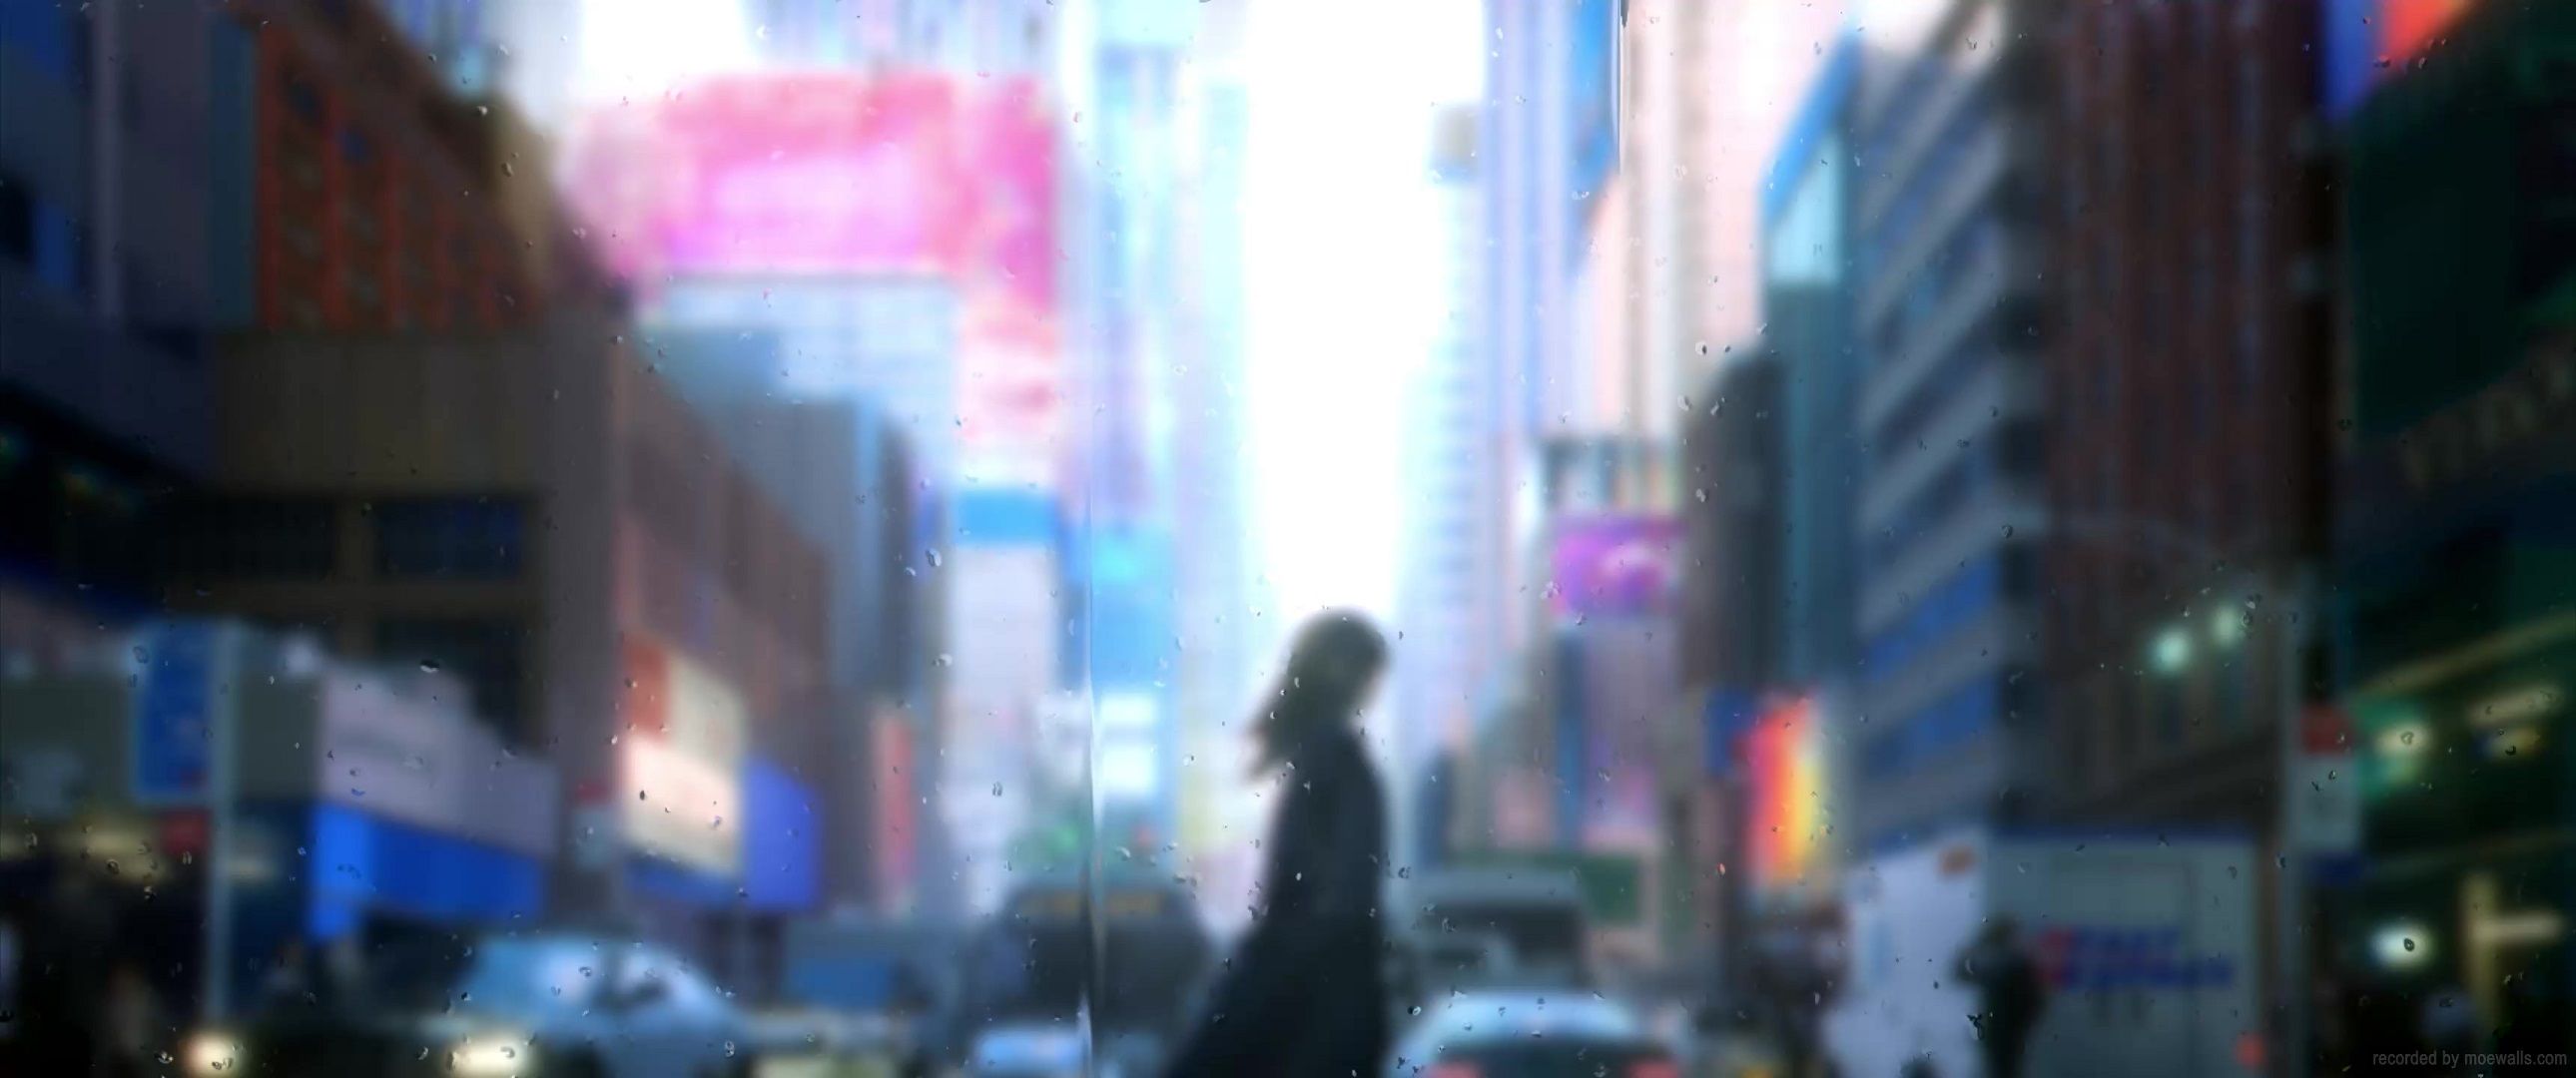 A woman walking down the street in front of tall buildings - Anime city